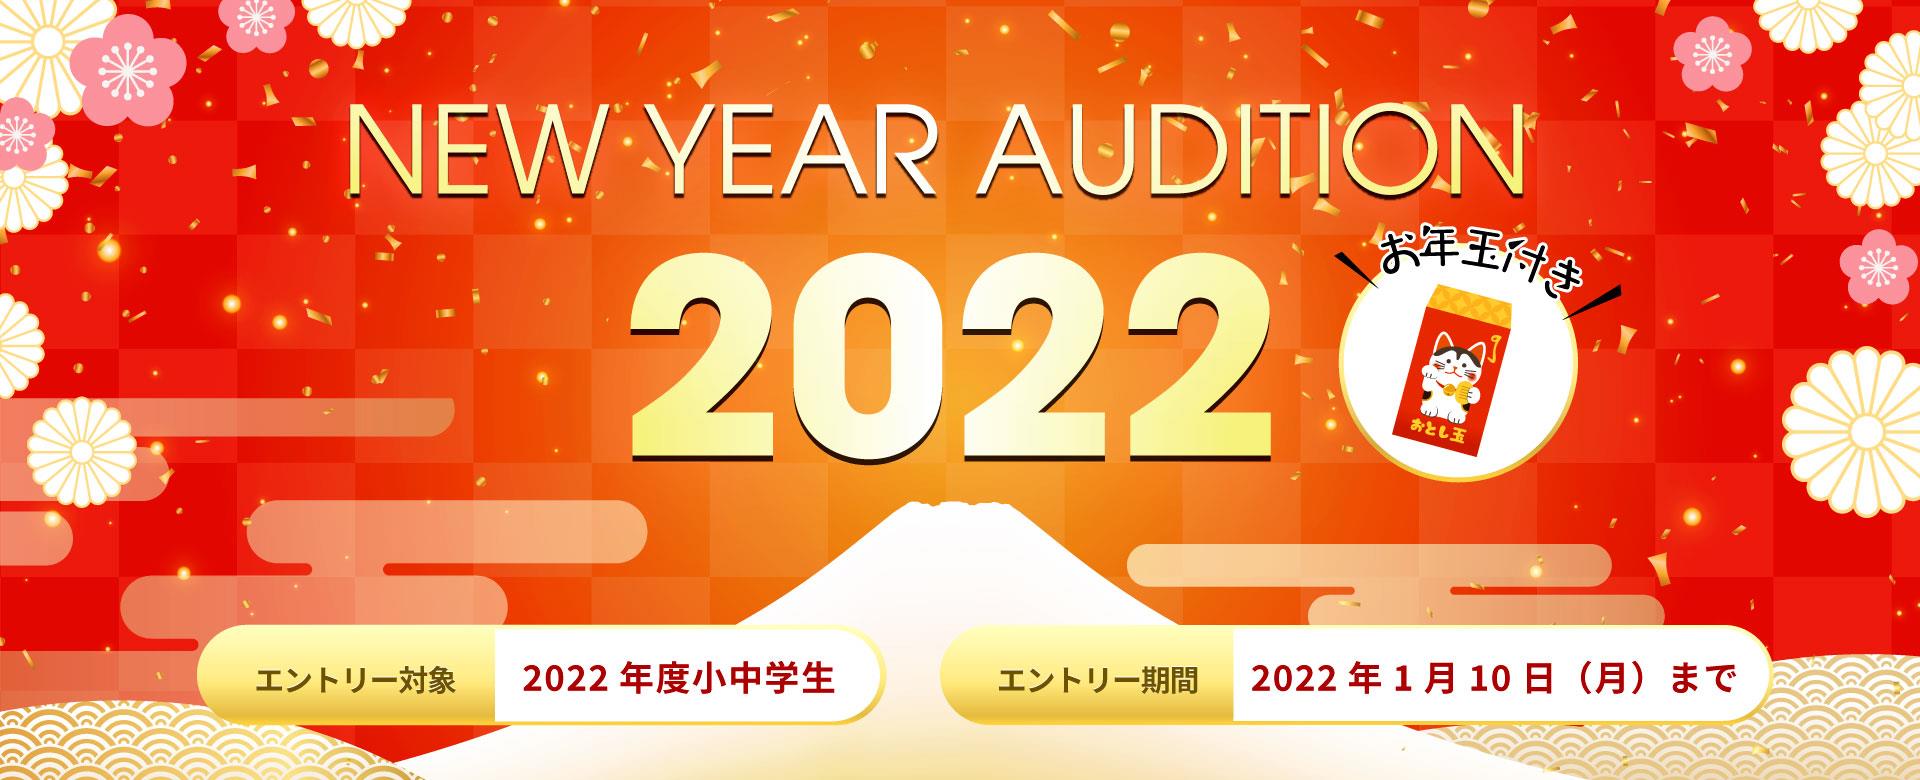 New Year Audition 2022